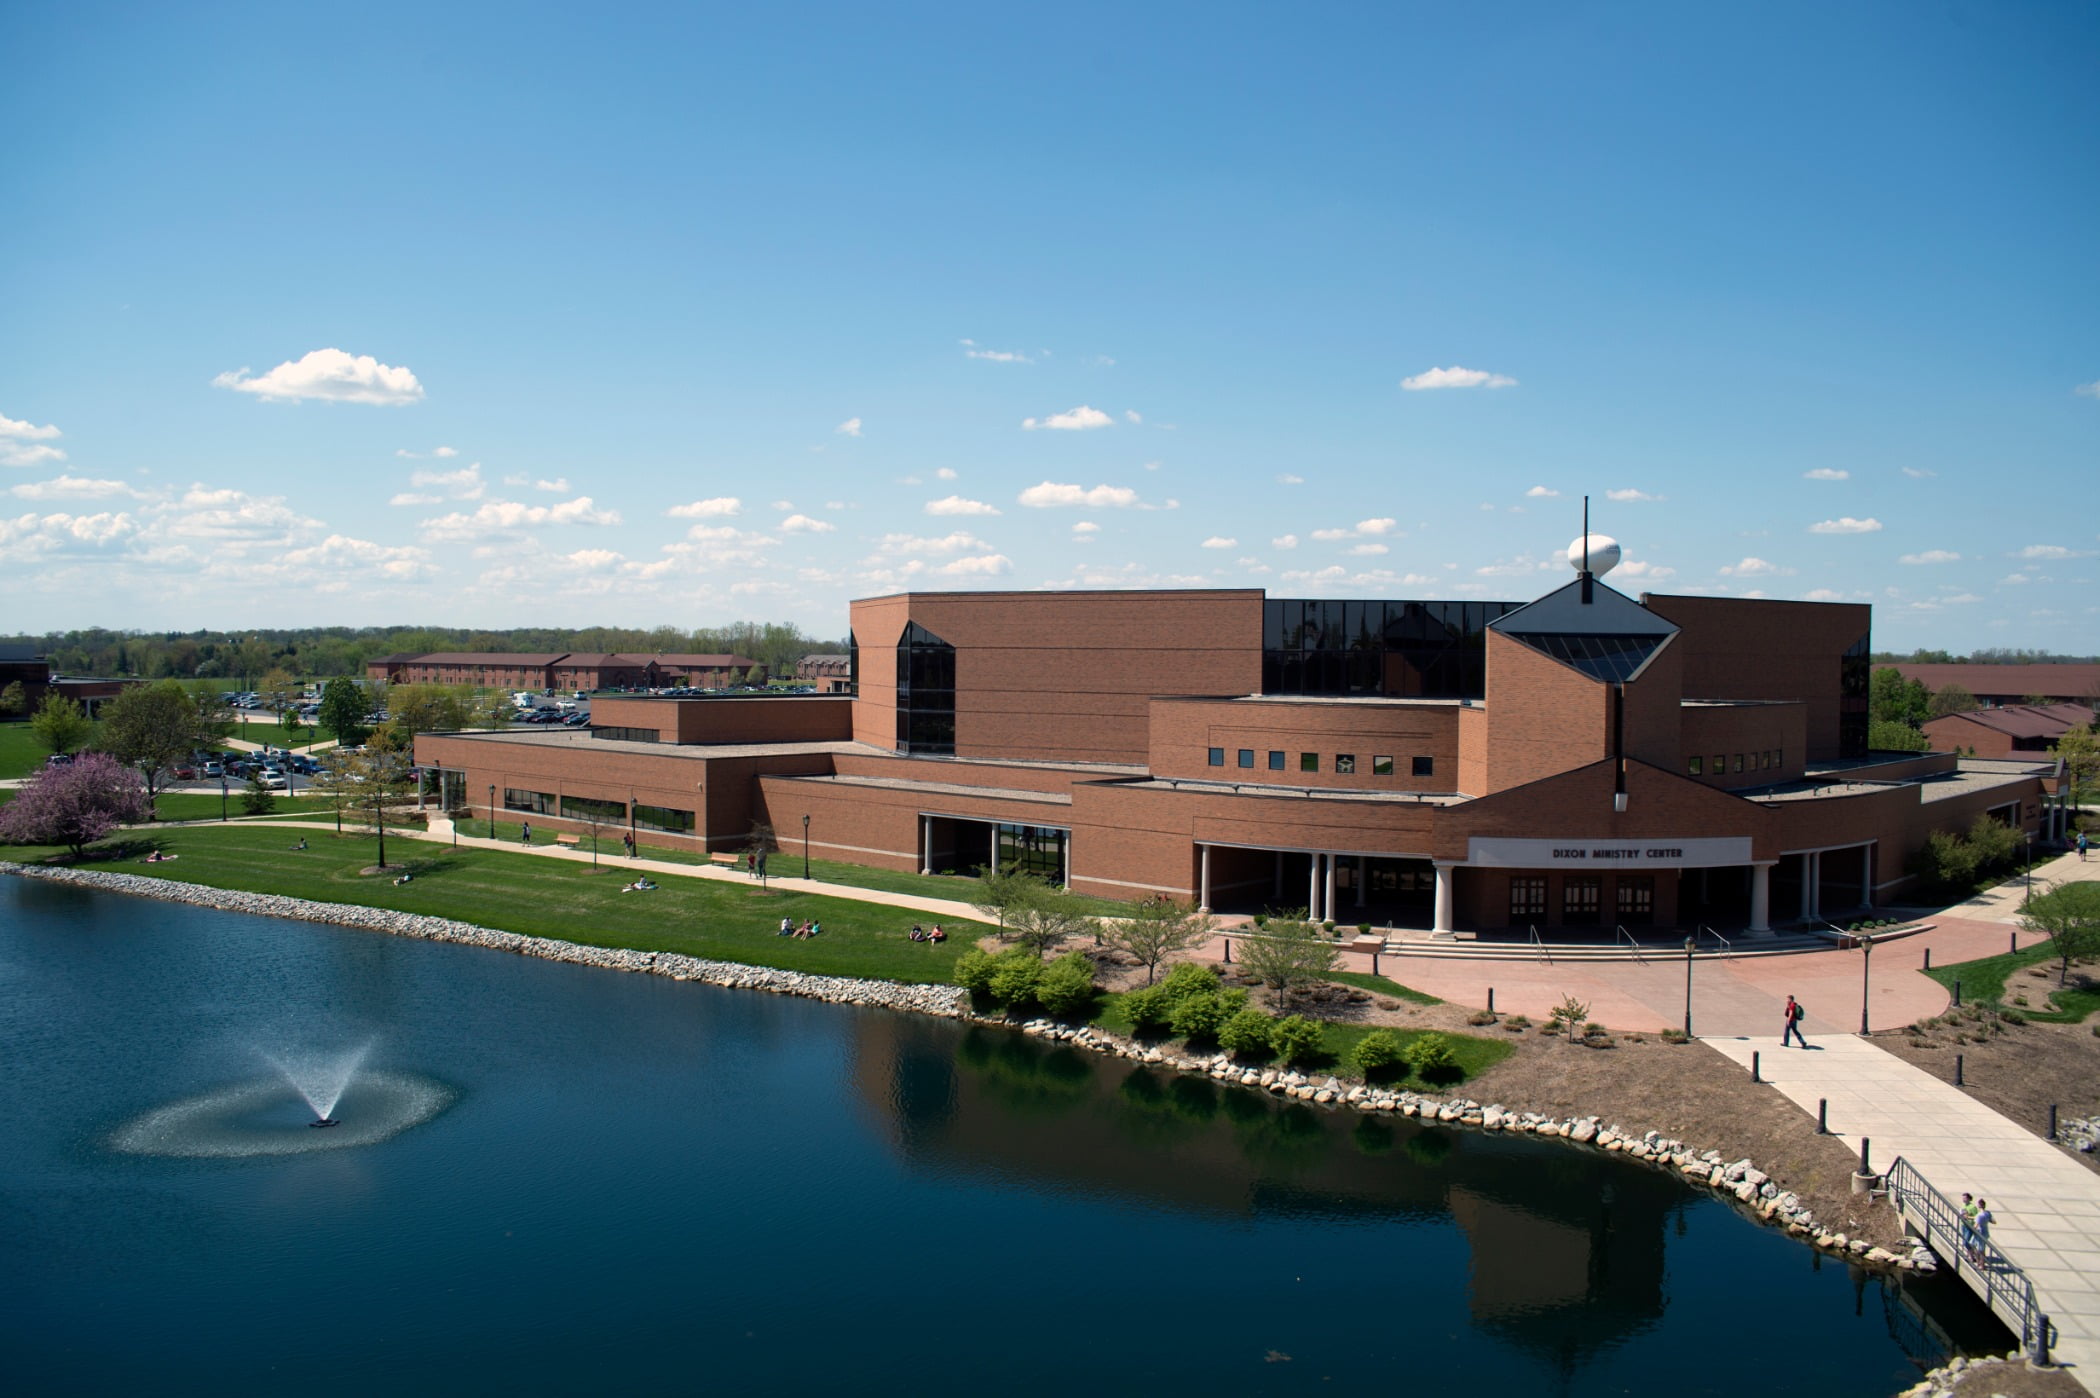 Cedarville University, a small, private college based in Ohio, implemented a number of COVID-response measures to ensure staff and students are safe while on campus.